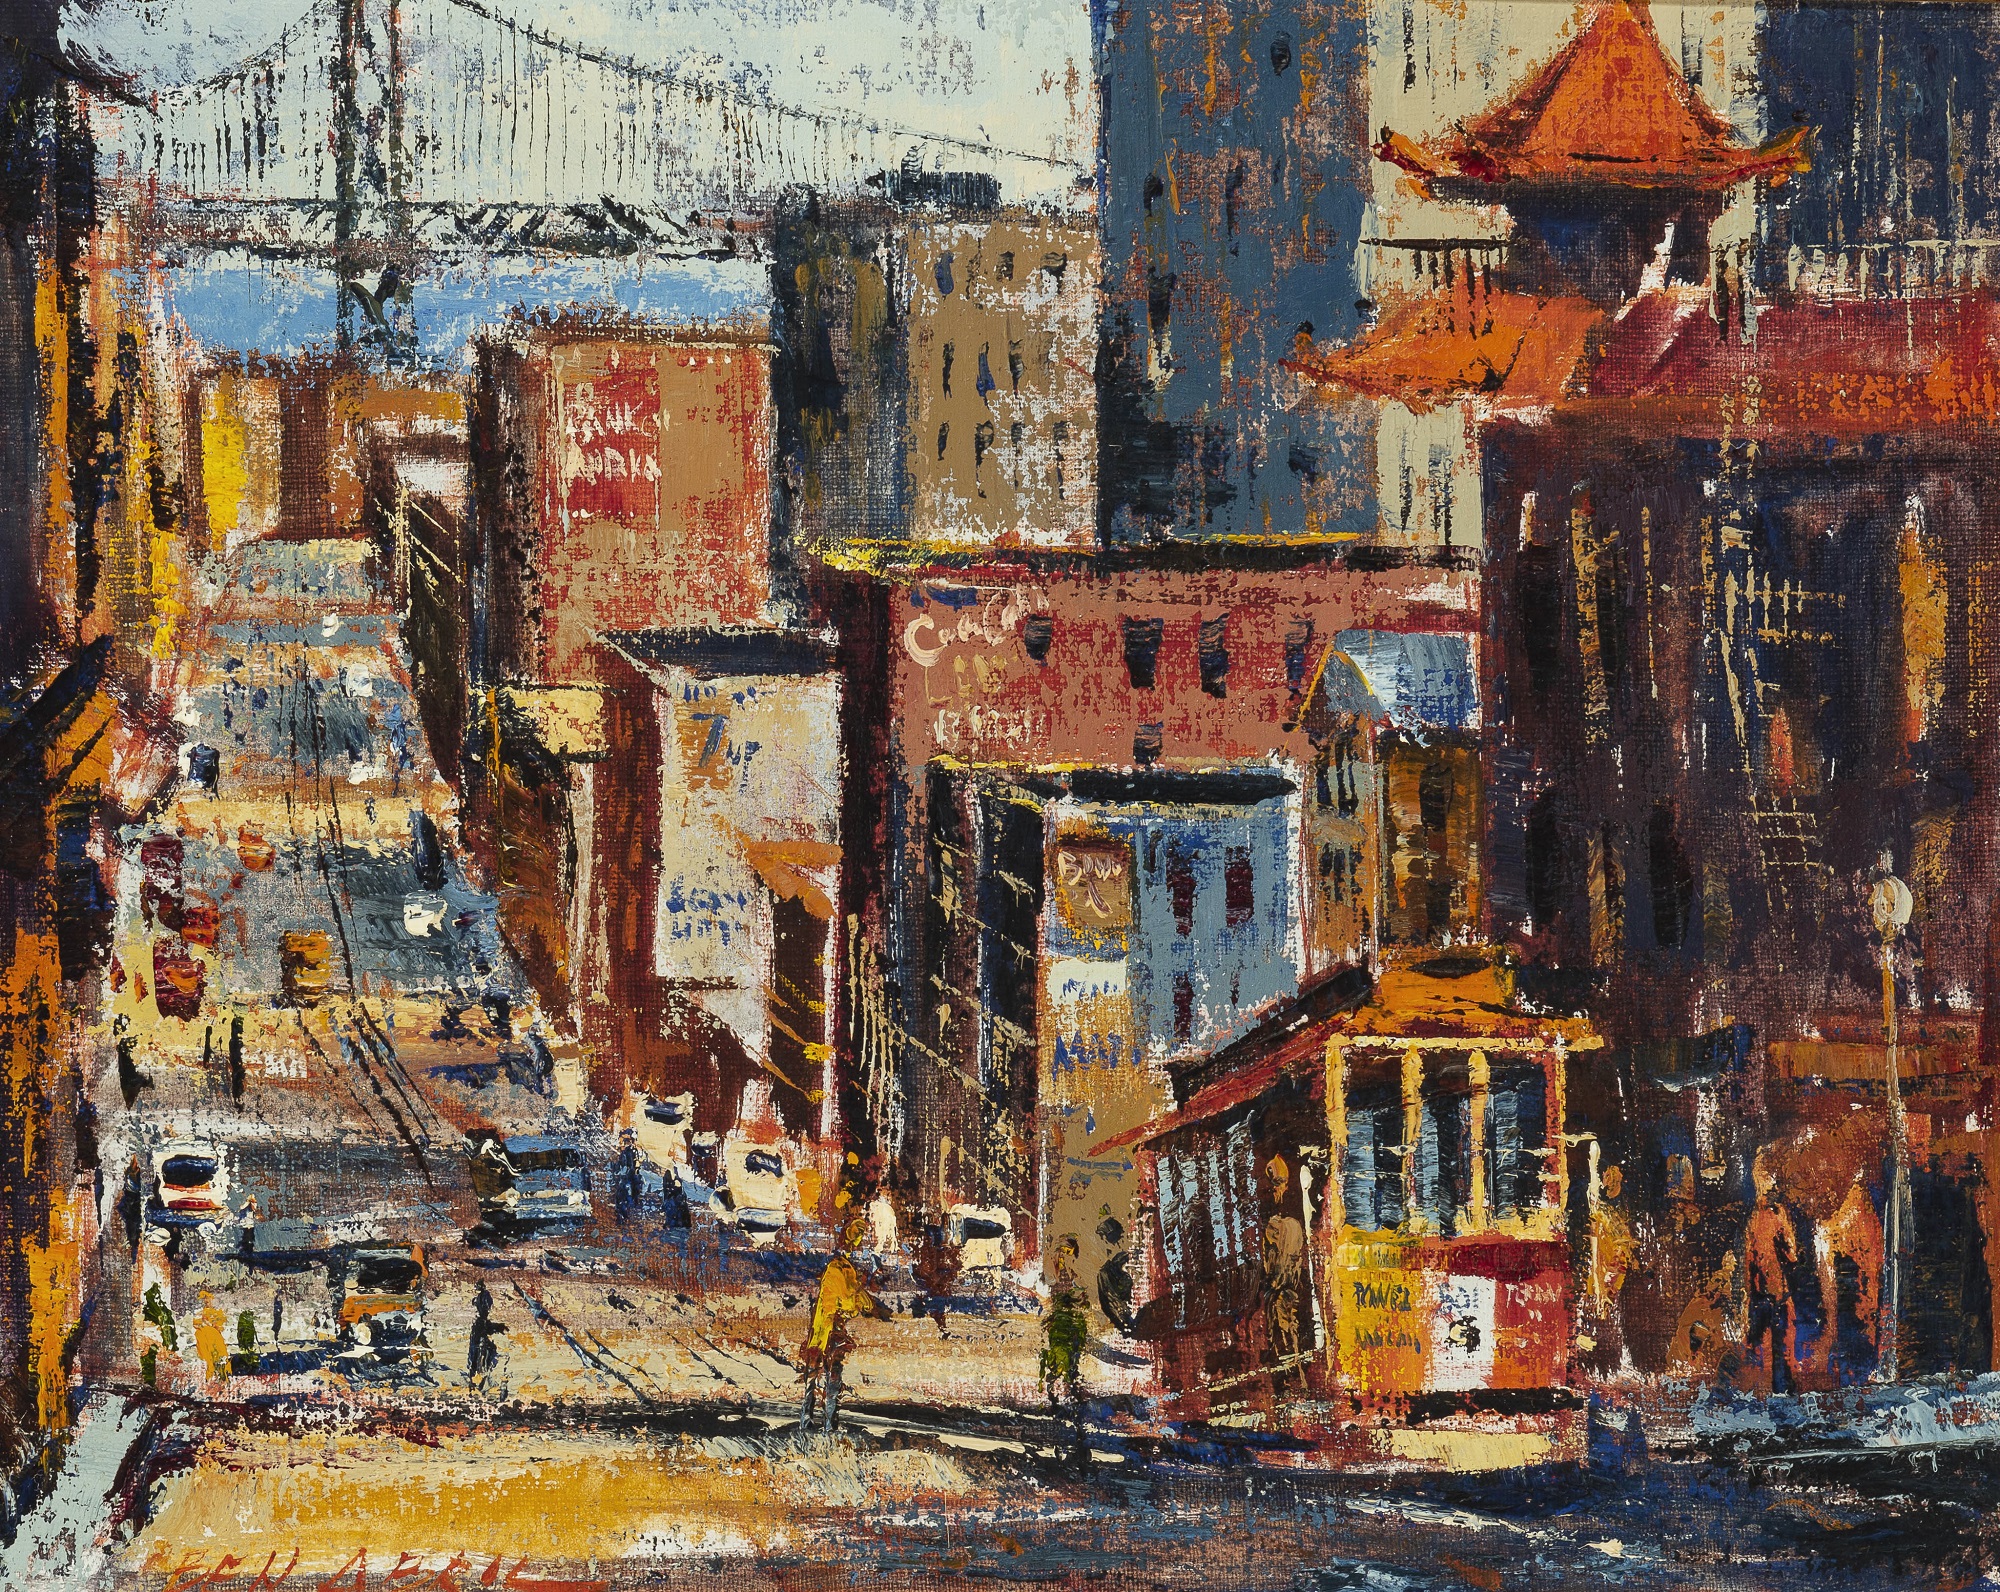 John Moran achieves strong prices in Aug. 21 Studio Auction